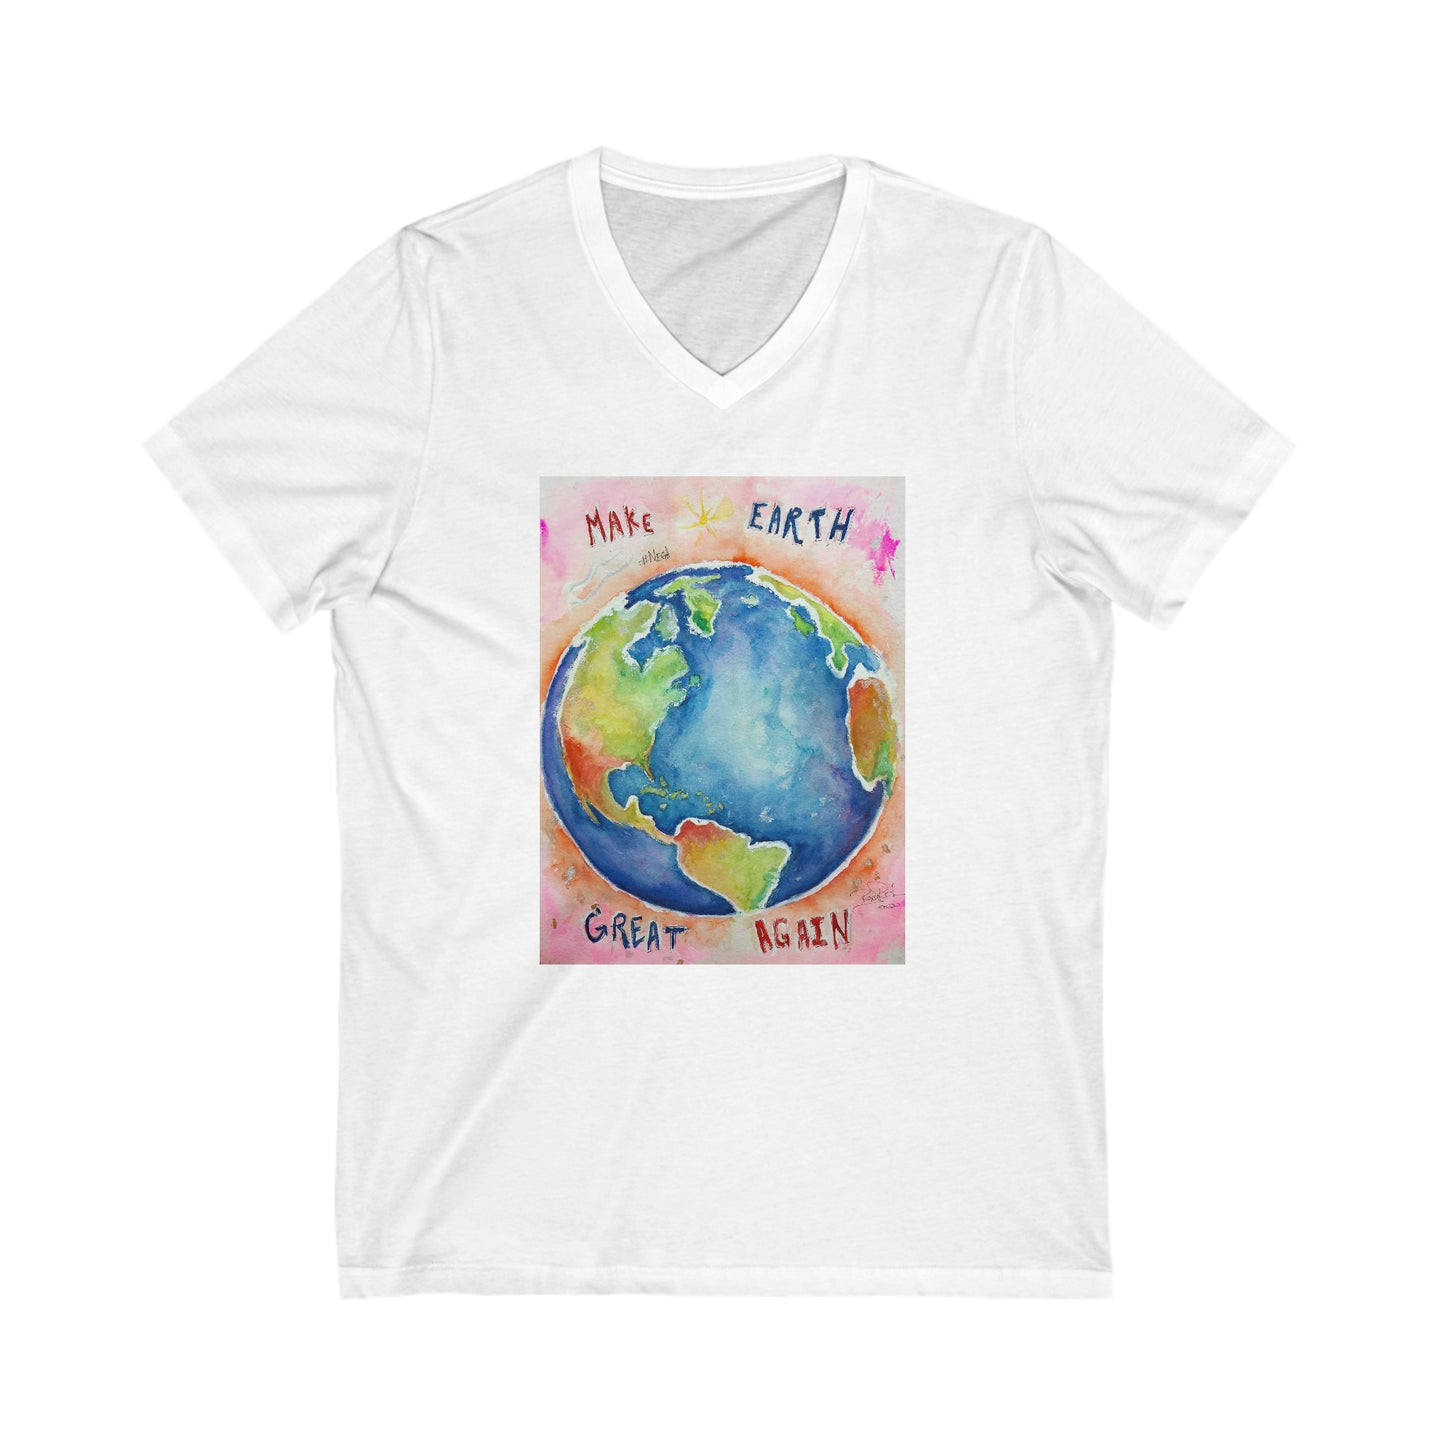 Make Earth Great Again-Unisexe Jersey Manches courtes Col en V Tee